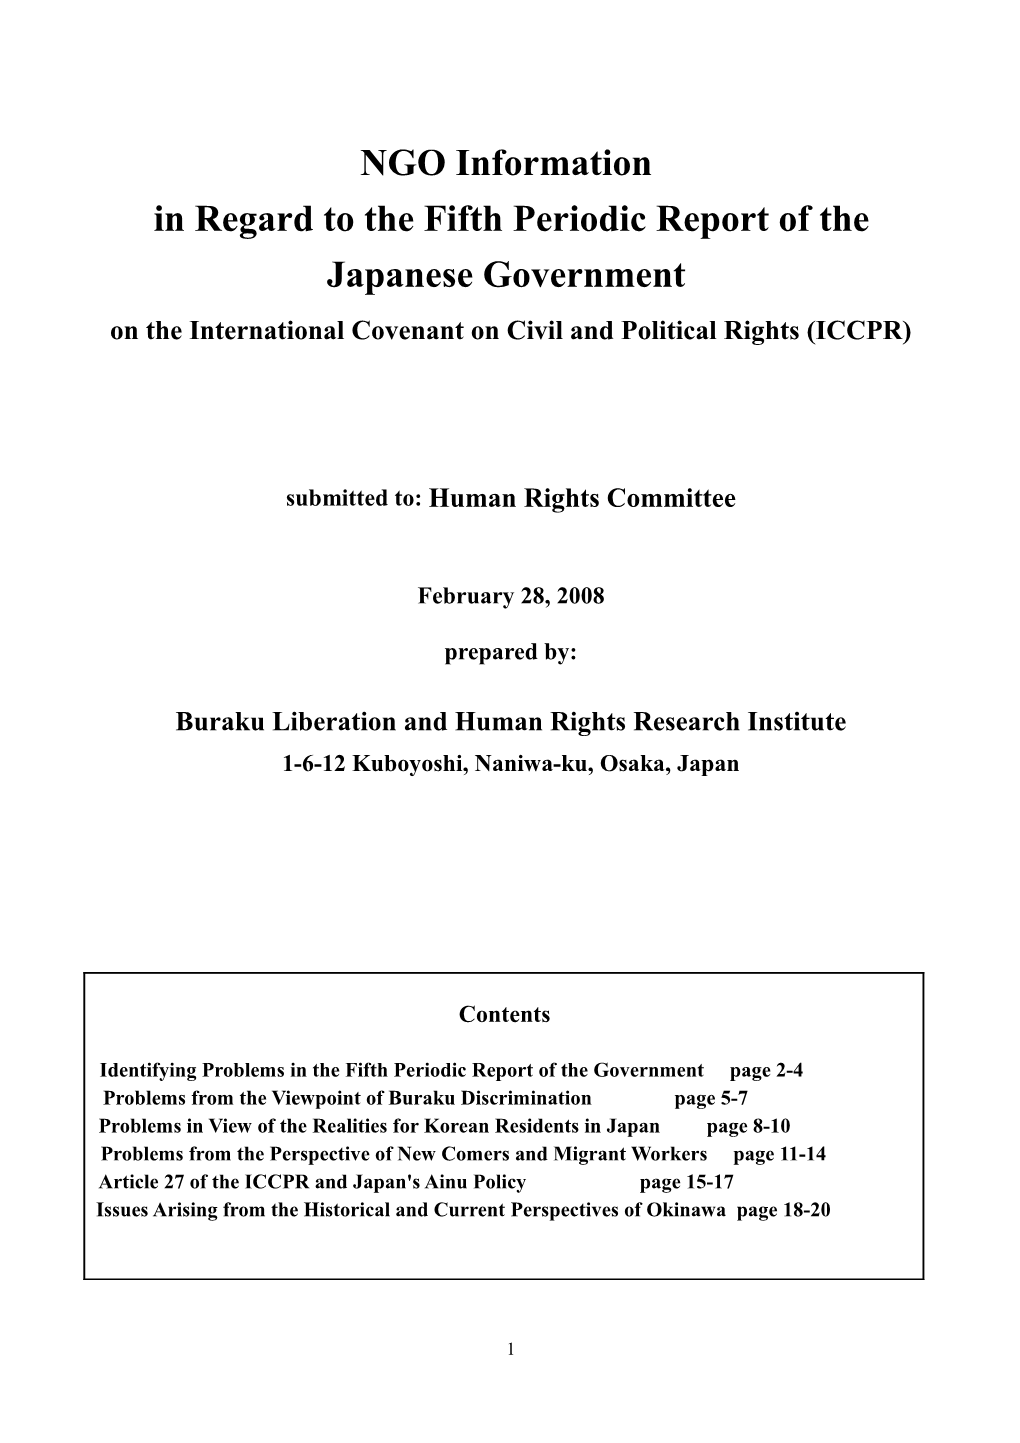 In Regard to the Fifth Periodic Report of the Japanese Government